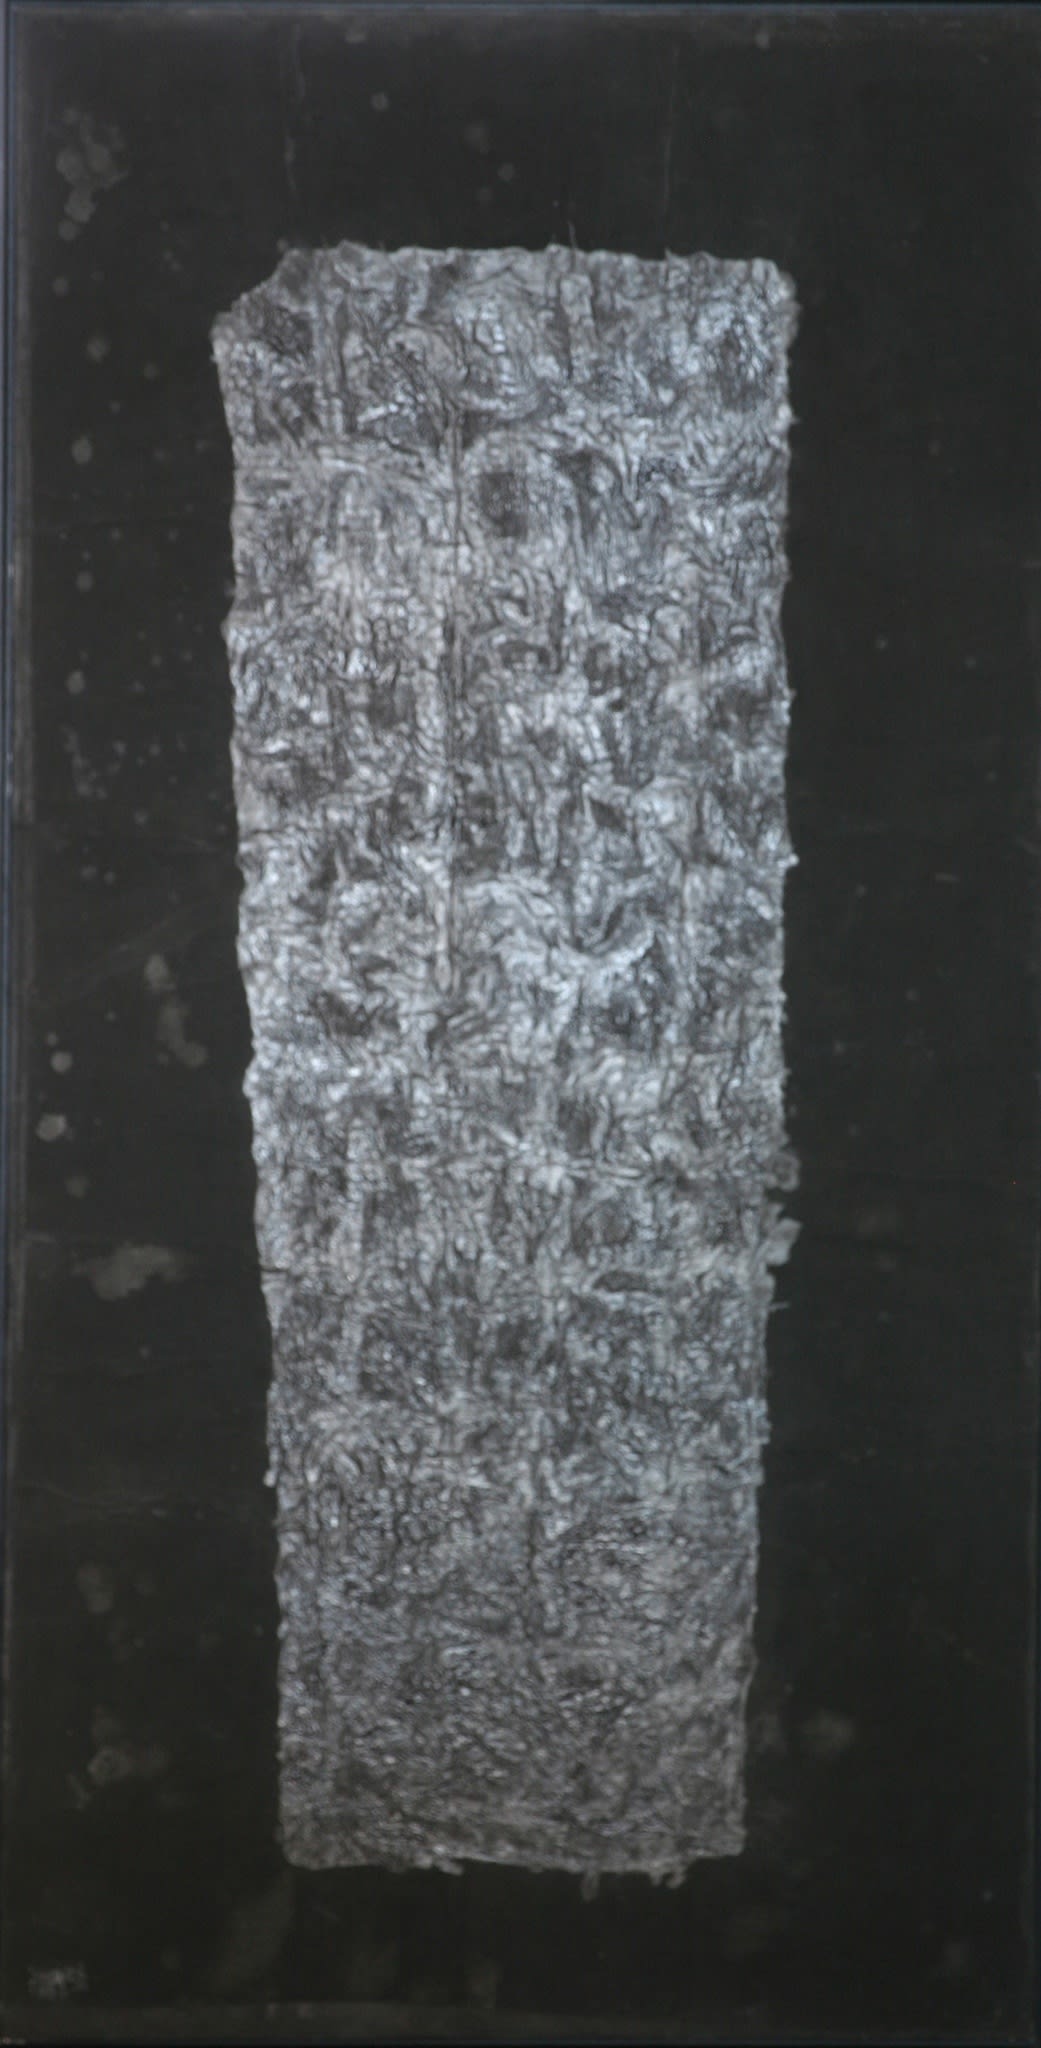 Yang Jiechang 杨诘苍, One Hundred Layers of Ink 千层墨, 1989 